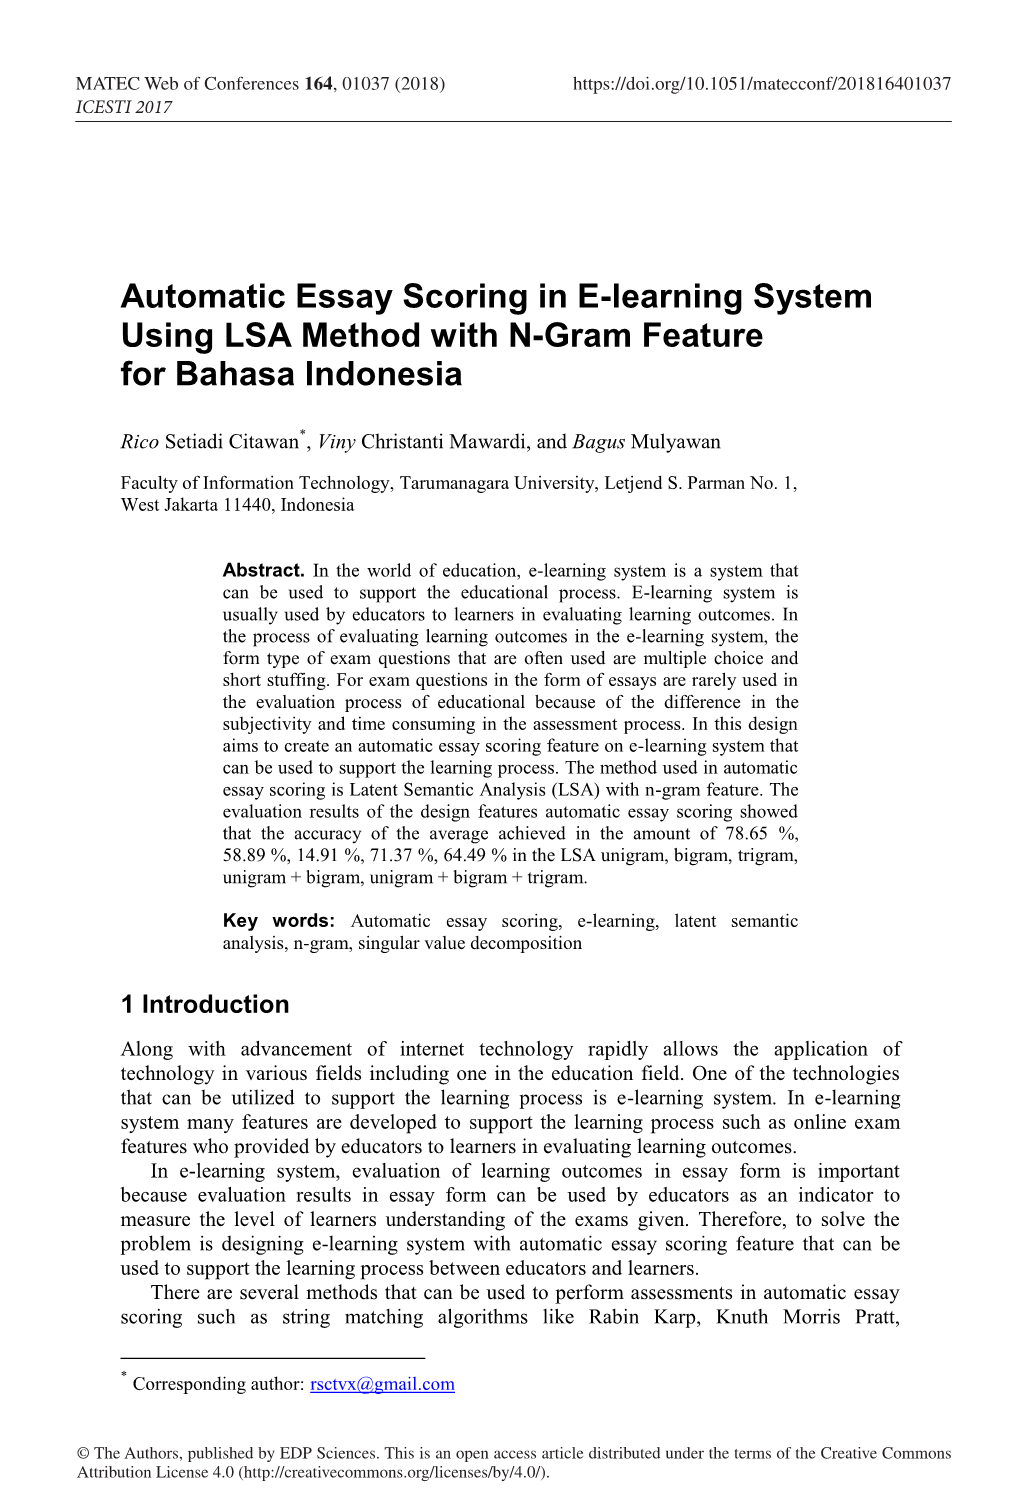 Automatic Essay Scoring in E-Learning System Using LSA Method with N-Gram Feature for Bahasa Indonesia